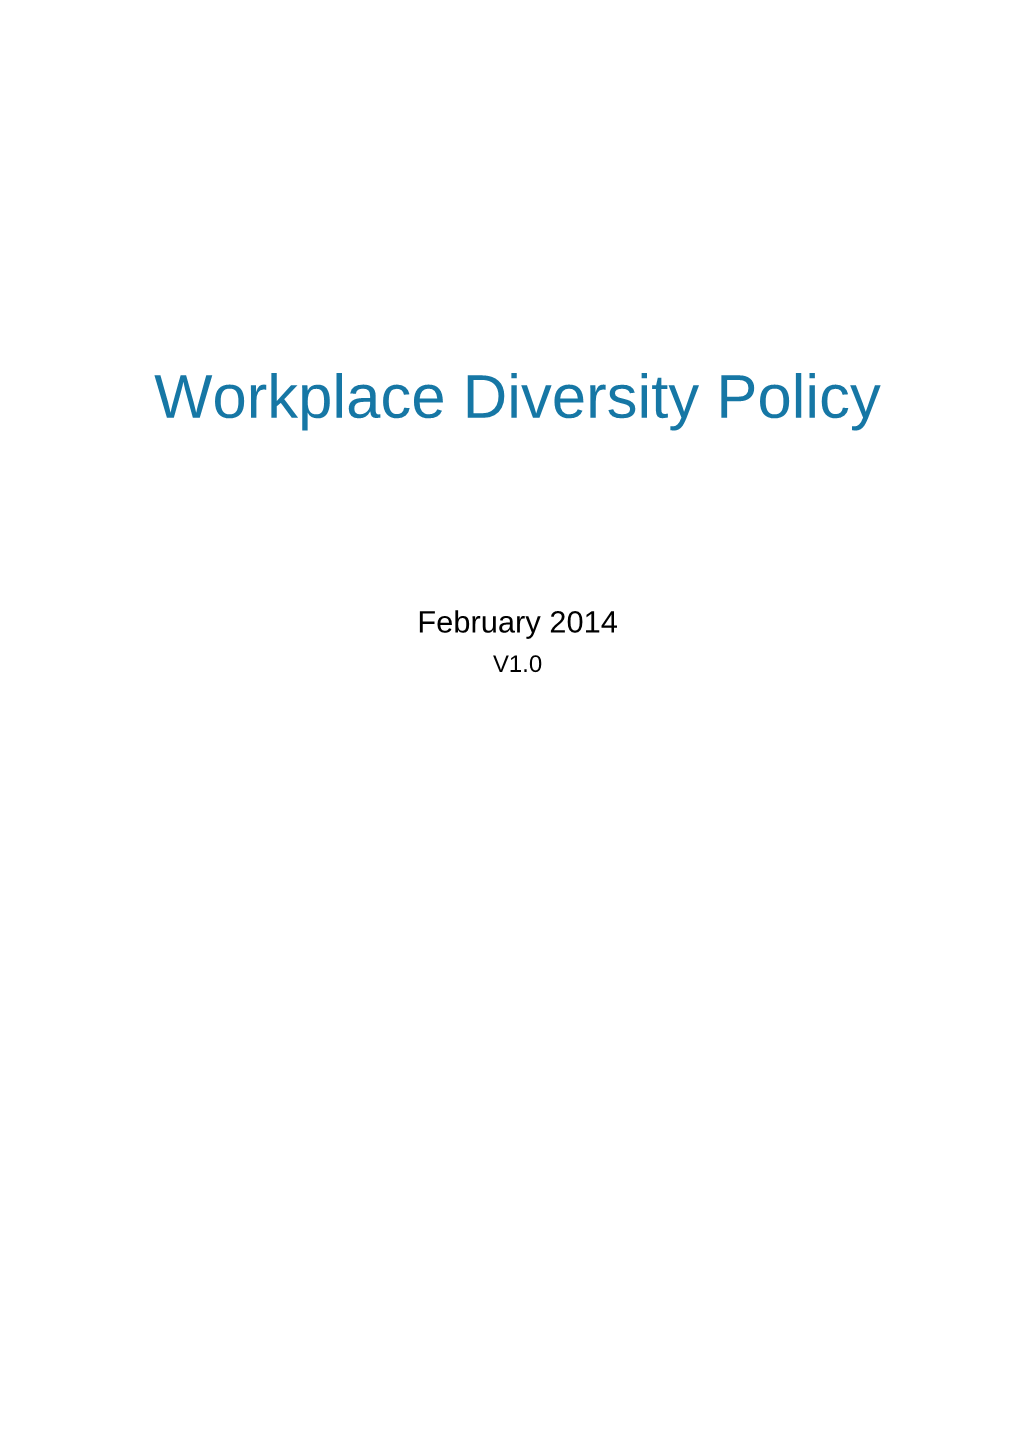 Australian Commission on Safety and Quality in Health Care - Workplace Diversity Policy